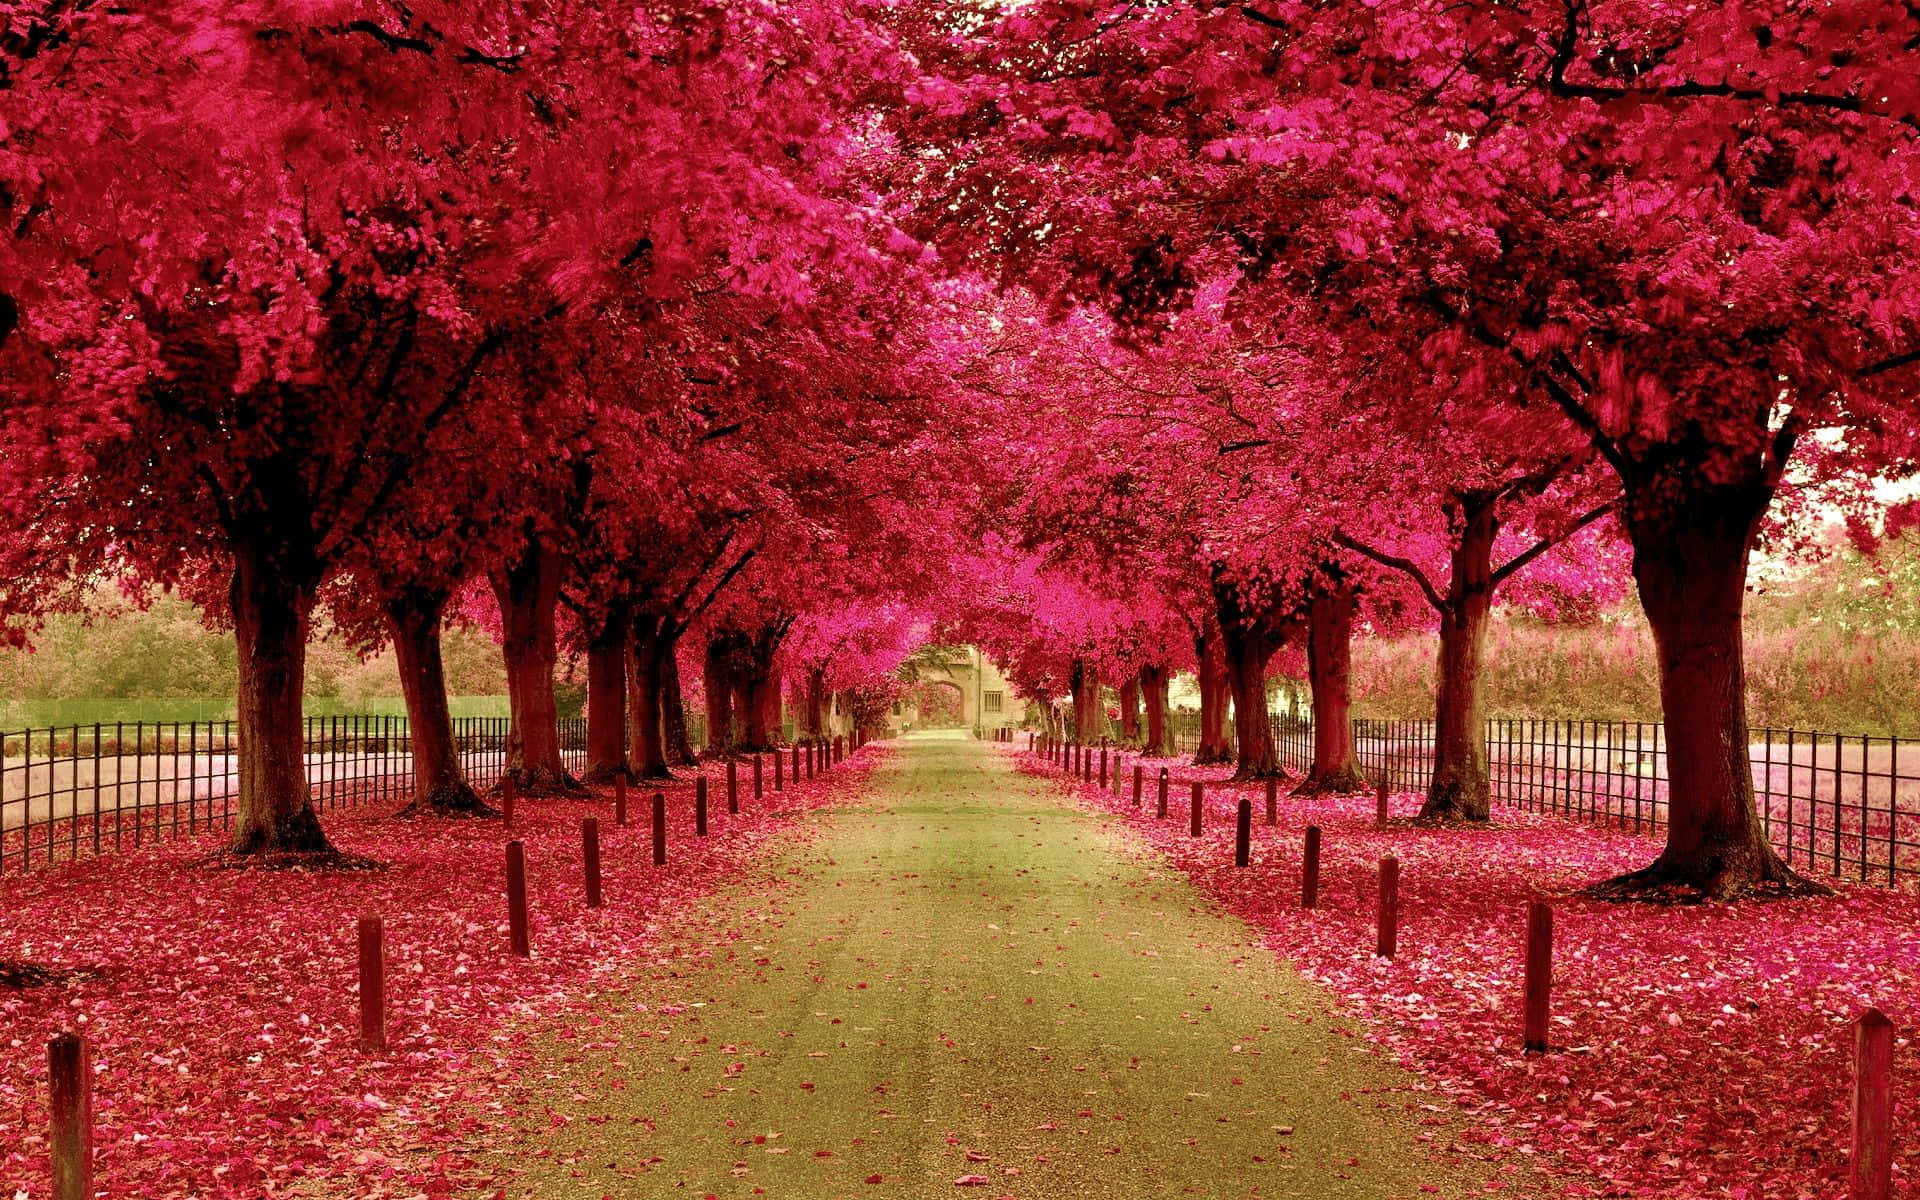 "Wonder in the beauty of this Pink Fall season." Wallpaper